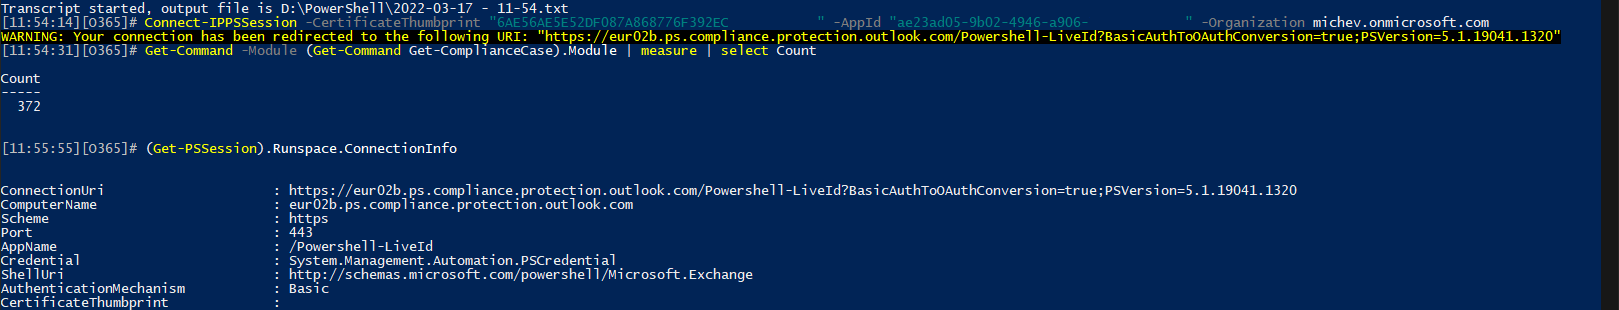 Connect to SCC PowerShell via Certificate-based authentication